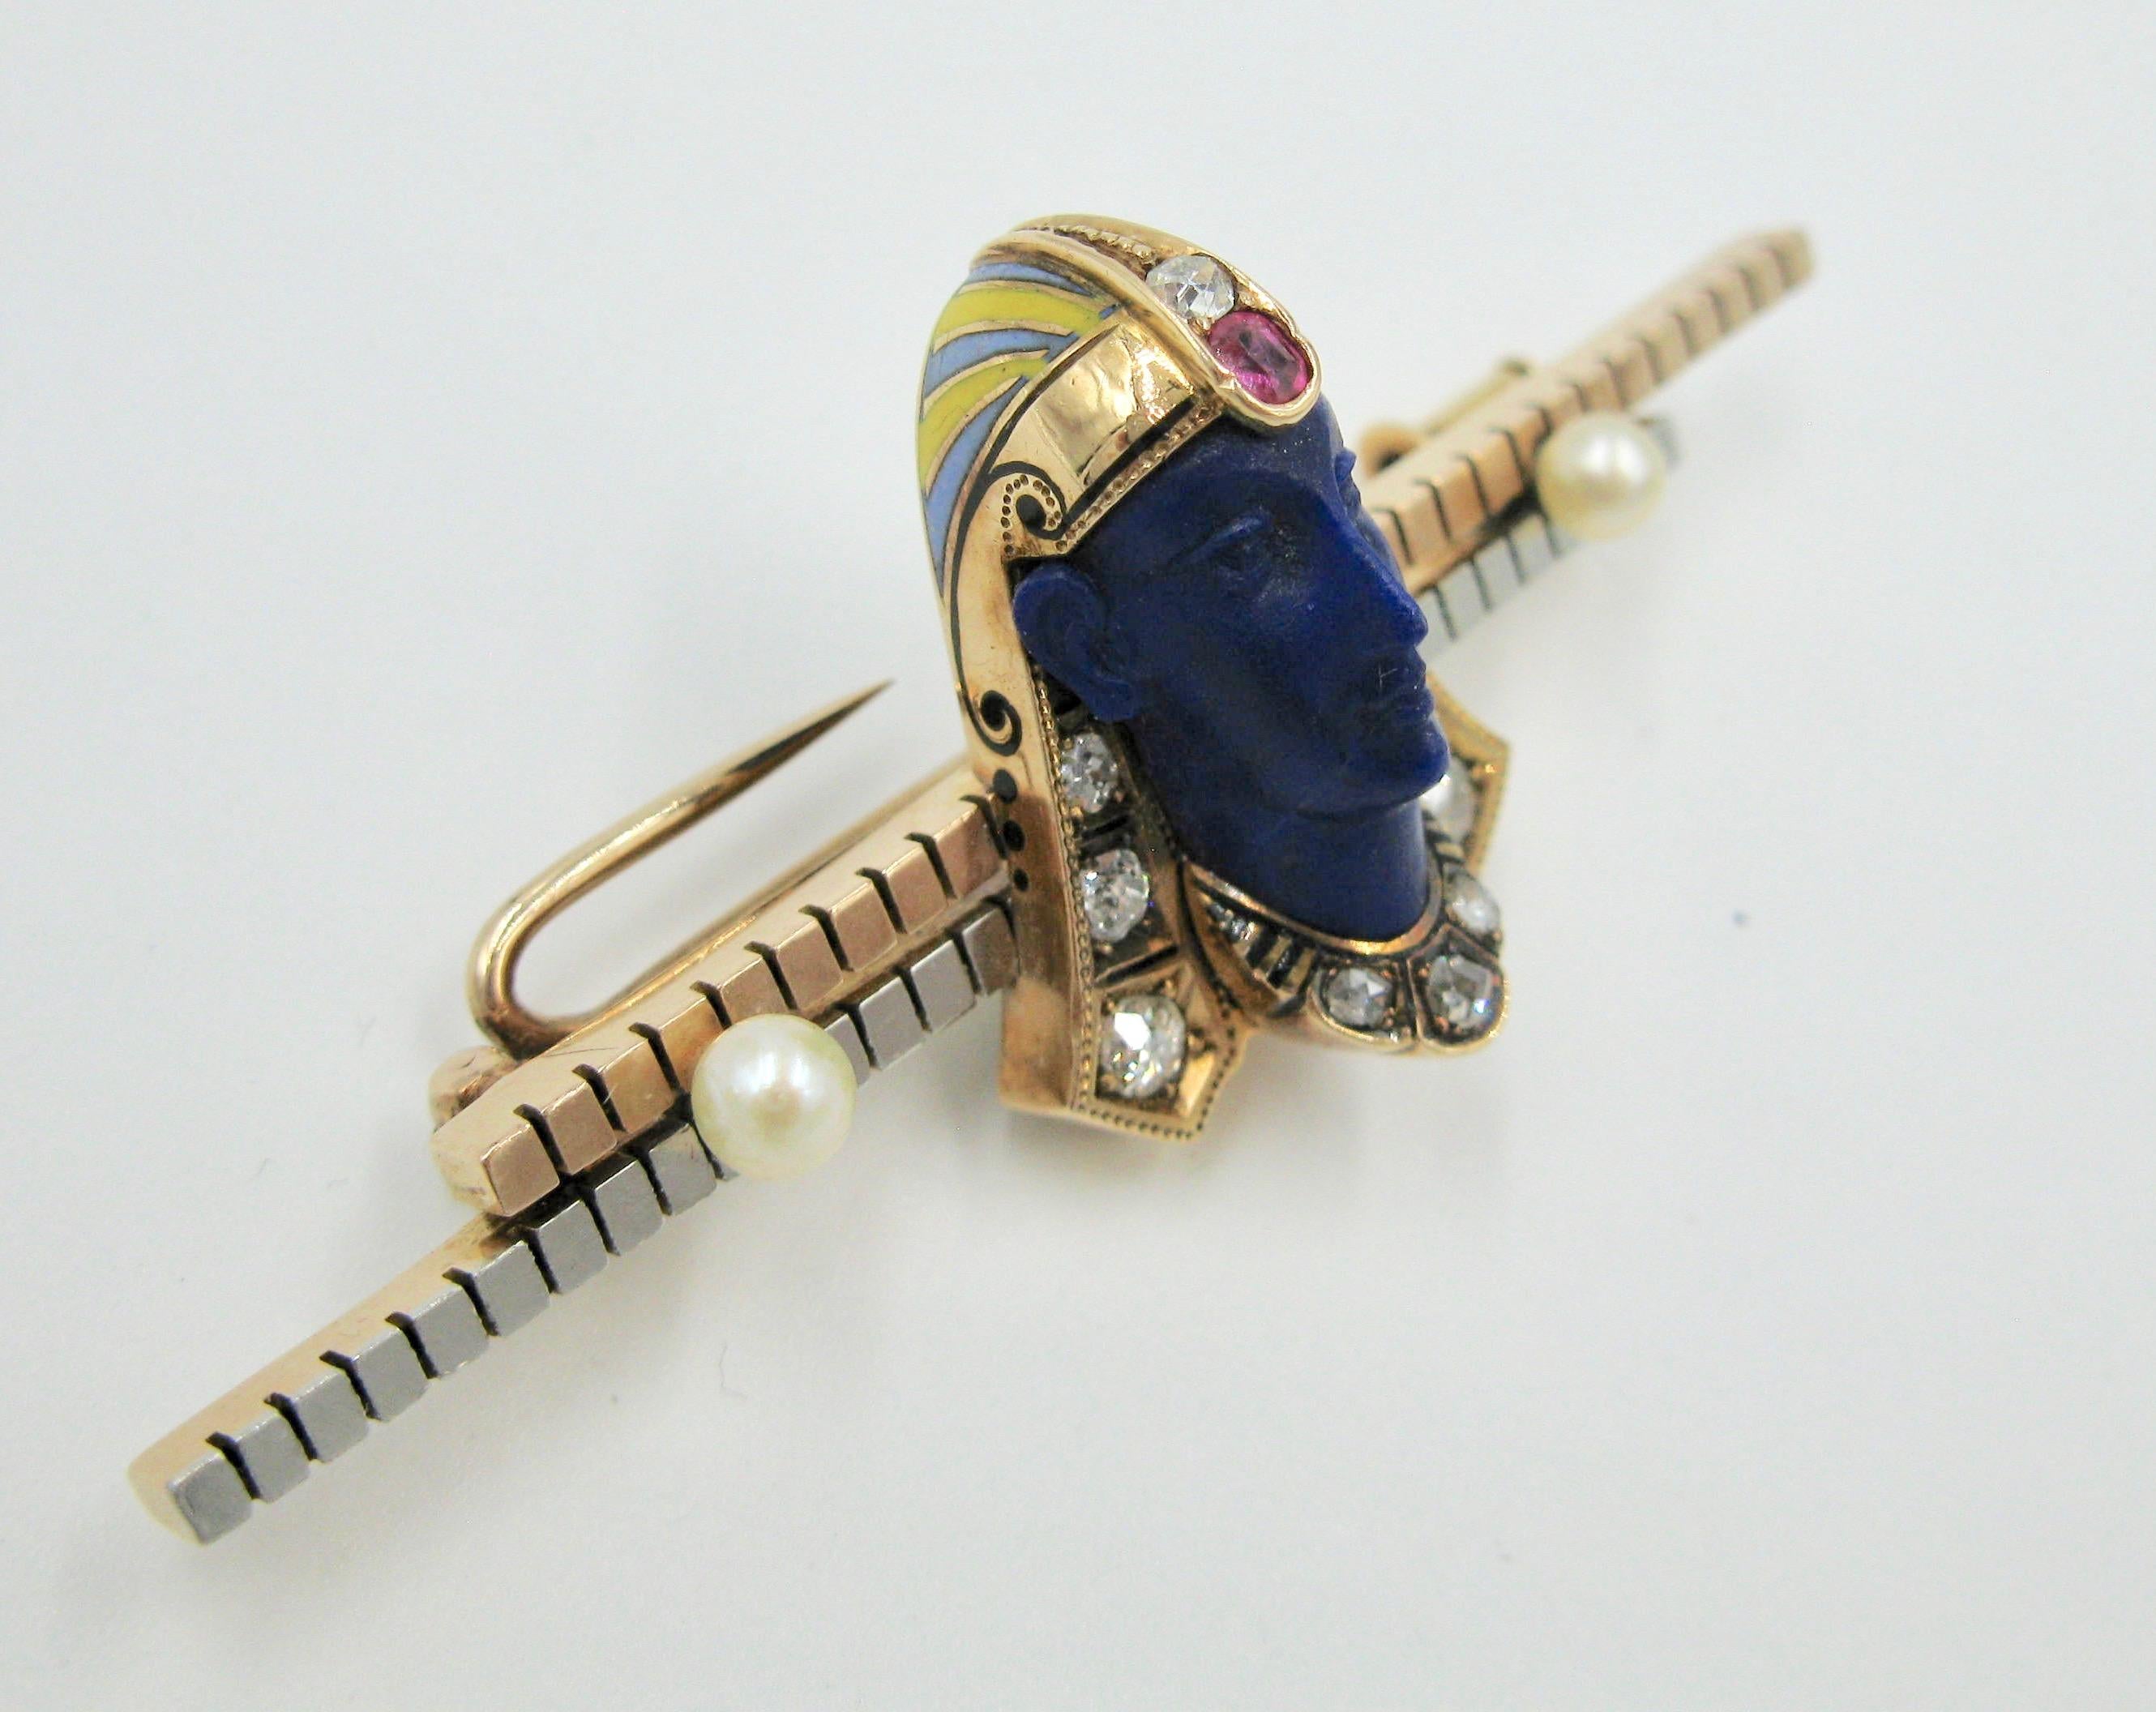 This is a museum quality Belle Epoque - Art Deco Egyptian Revival masterpiece with a Lapis Lazuli Pharoah, adorned with Old Mine and Rose Cut Diamonds, Ruby, and Pearls and set in 14 Karat Bi-color Gold with yellow, blue and black enamel.  The